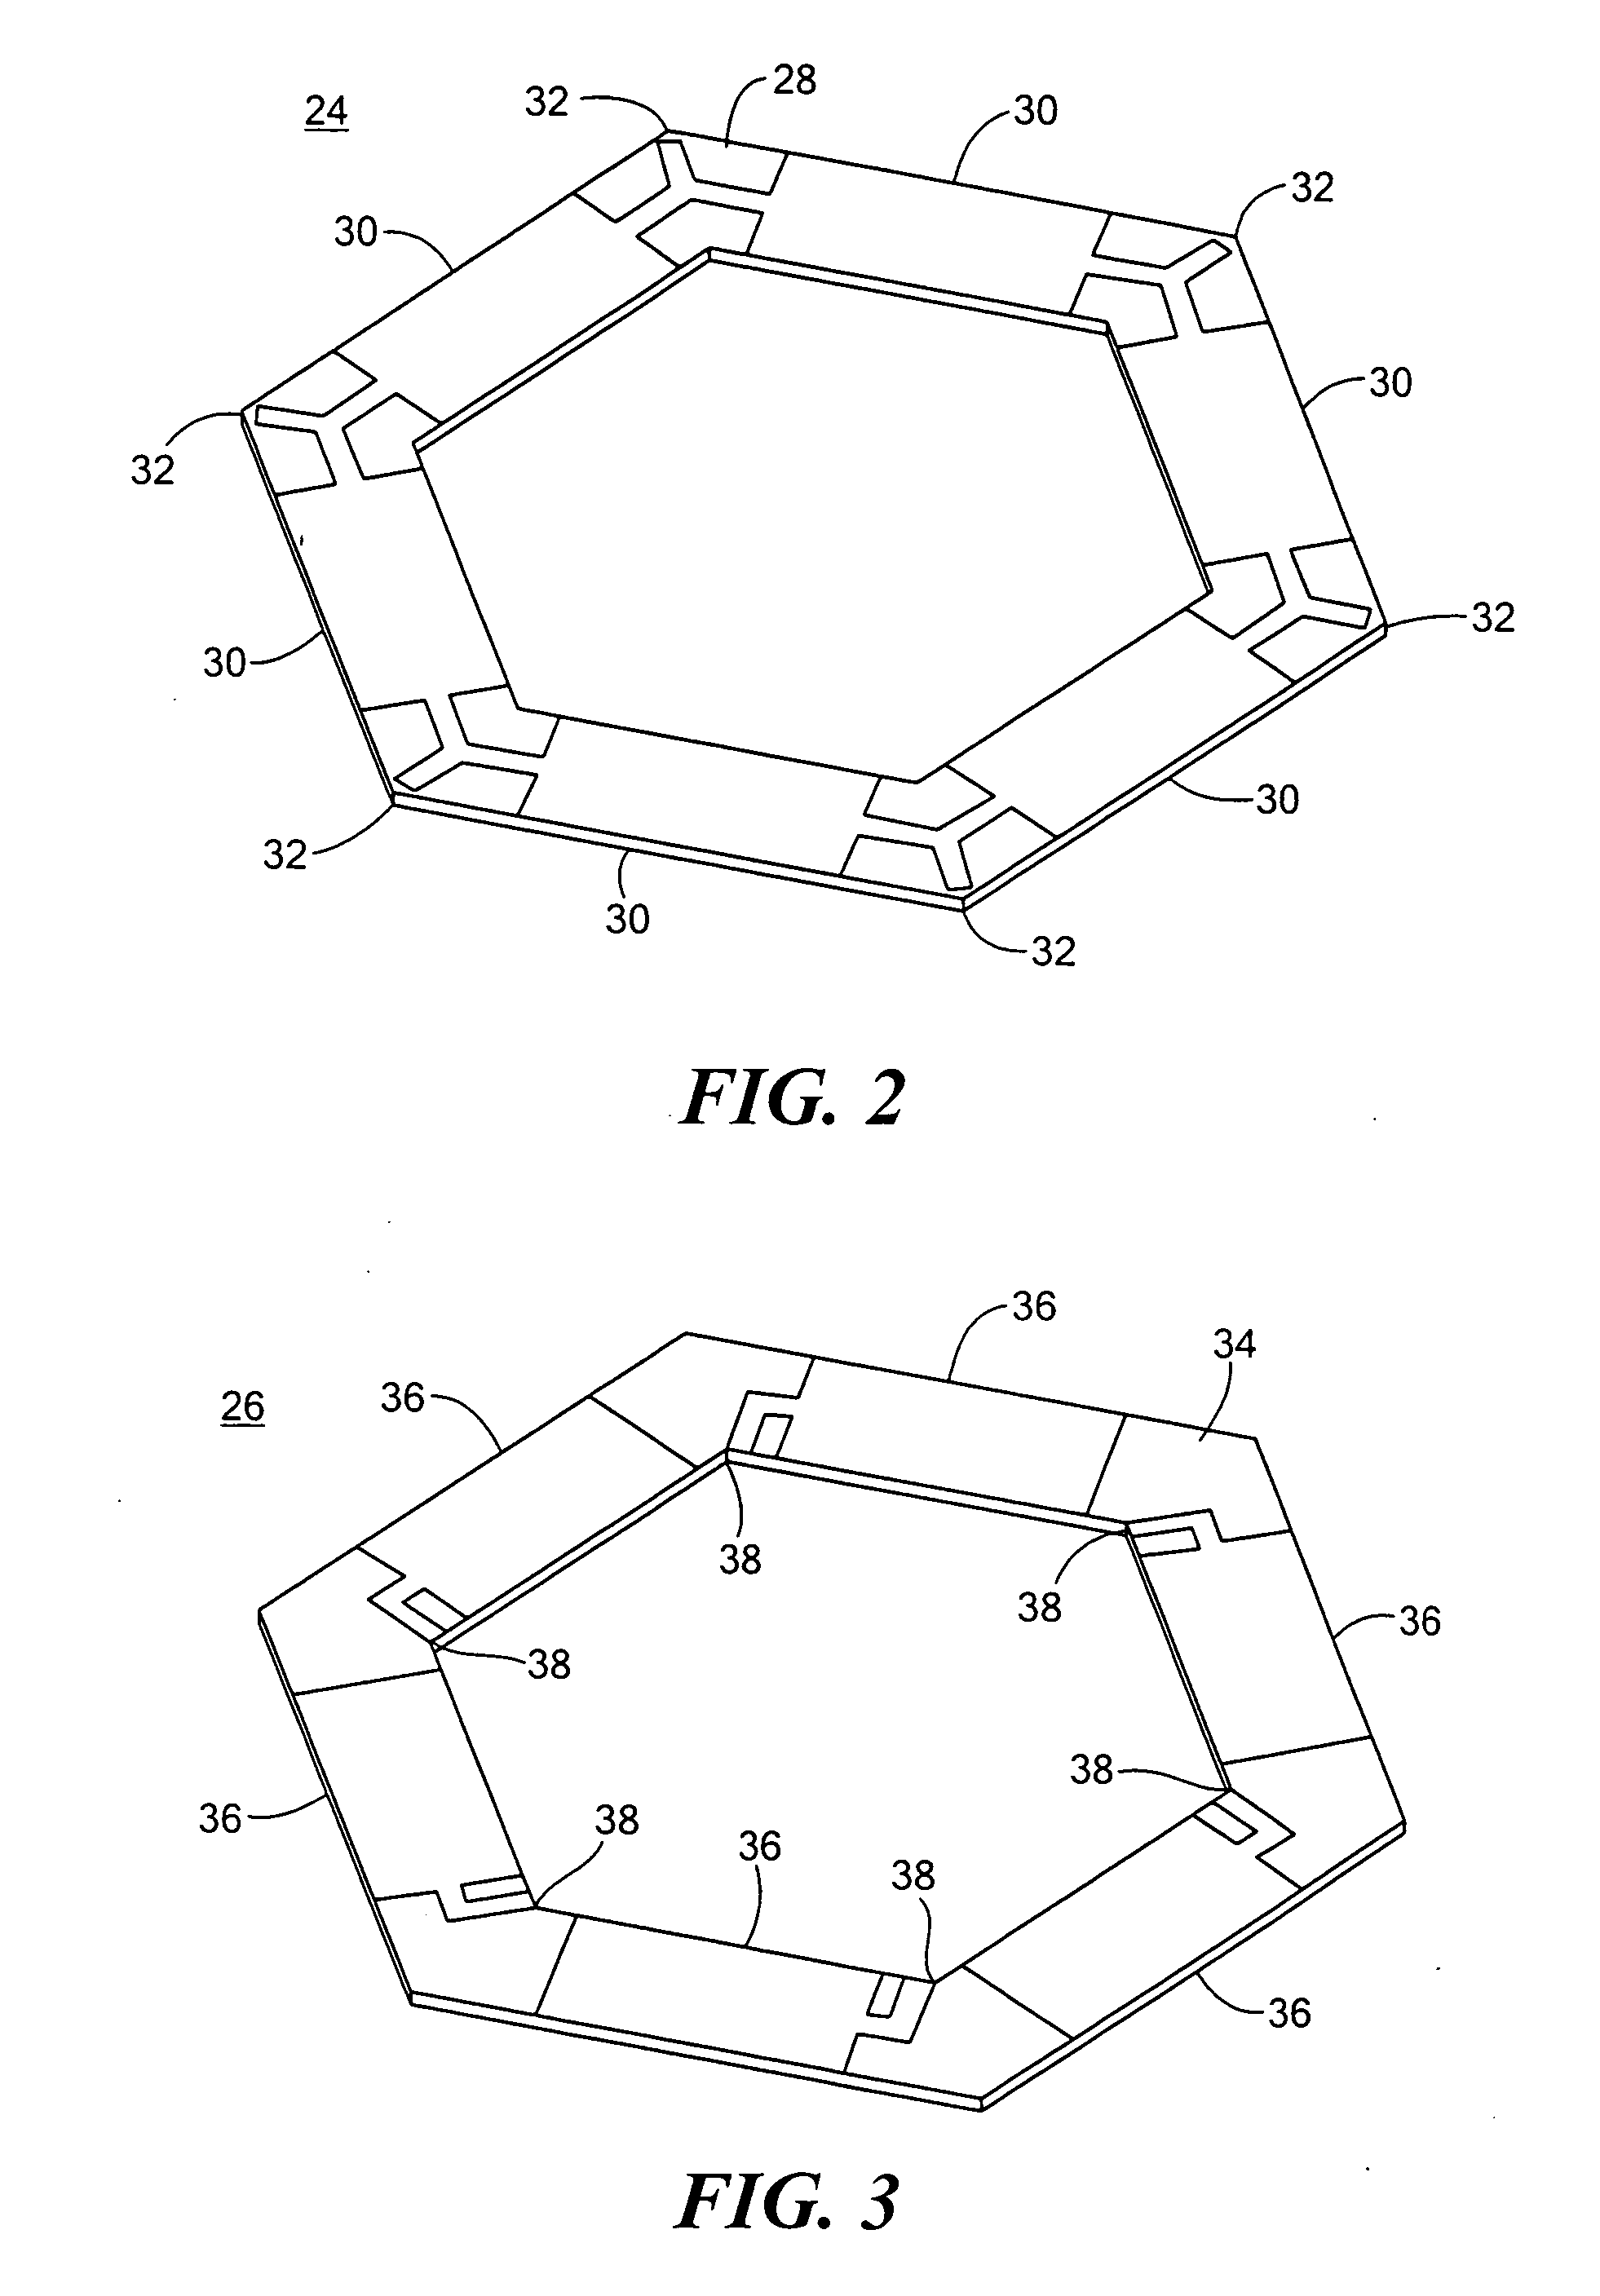 Multichannel, surface parallel, zonal transducer system